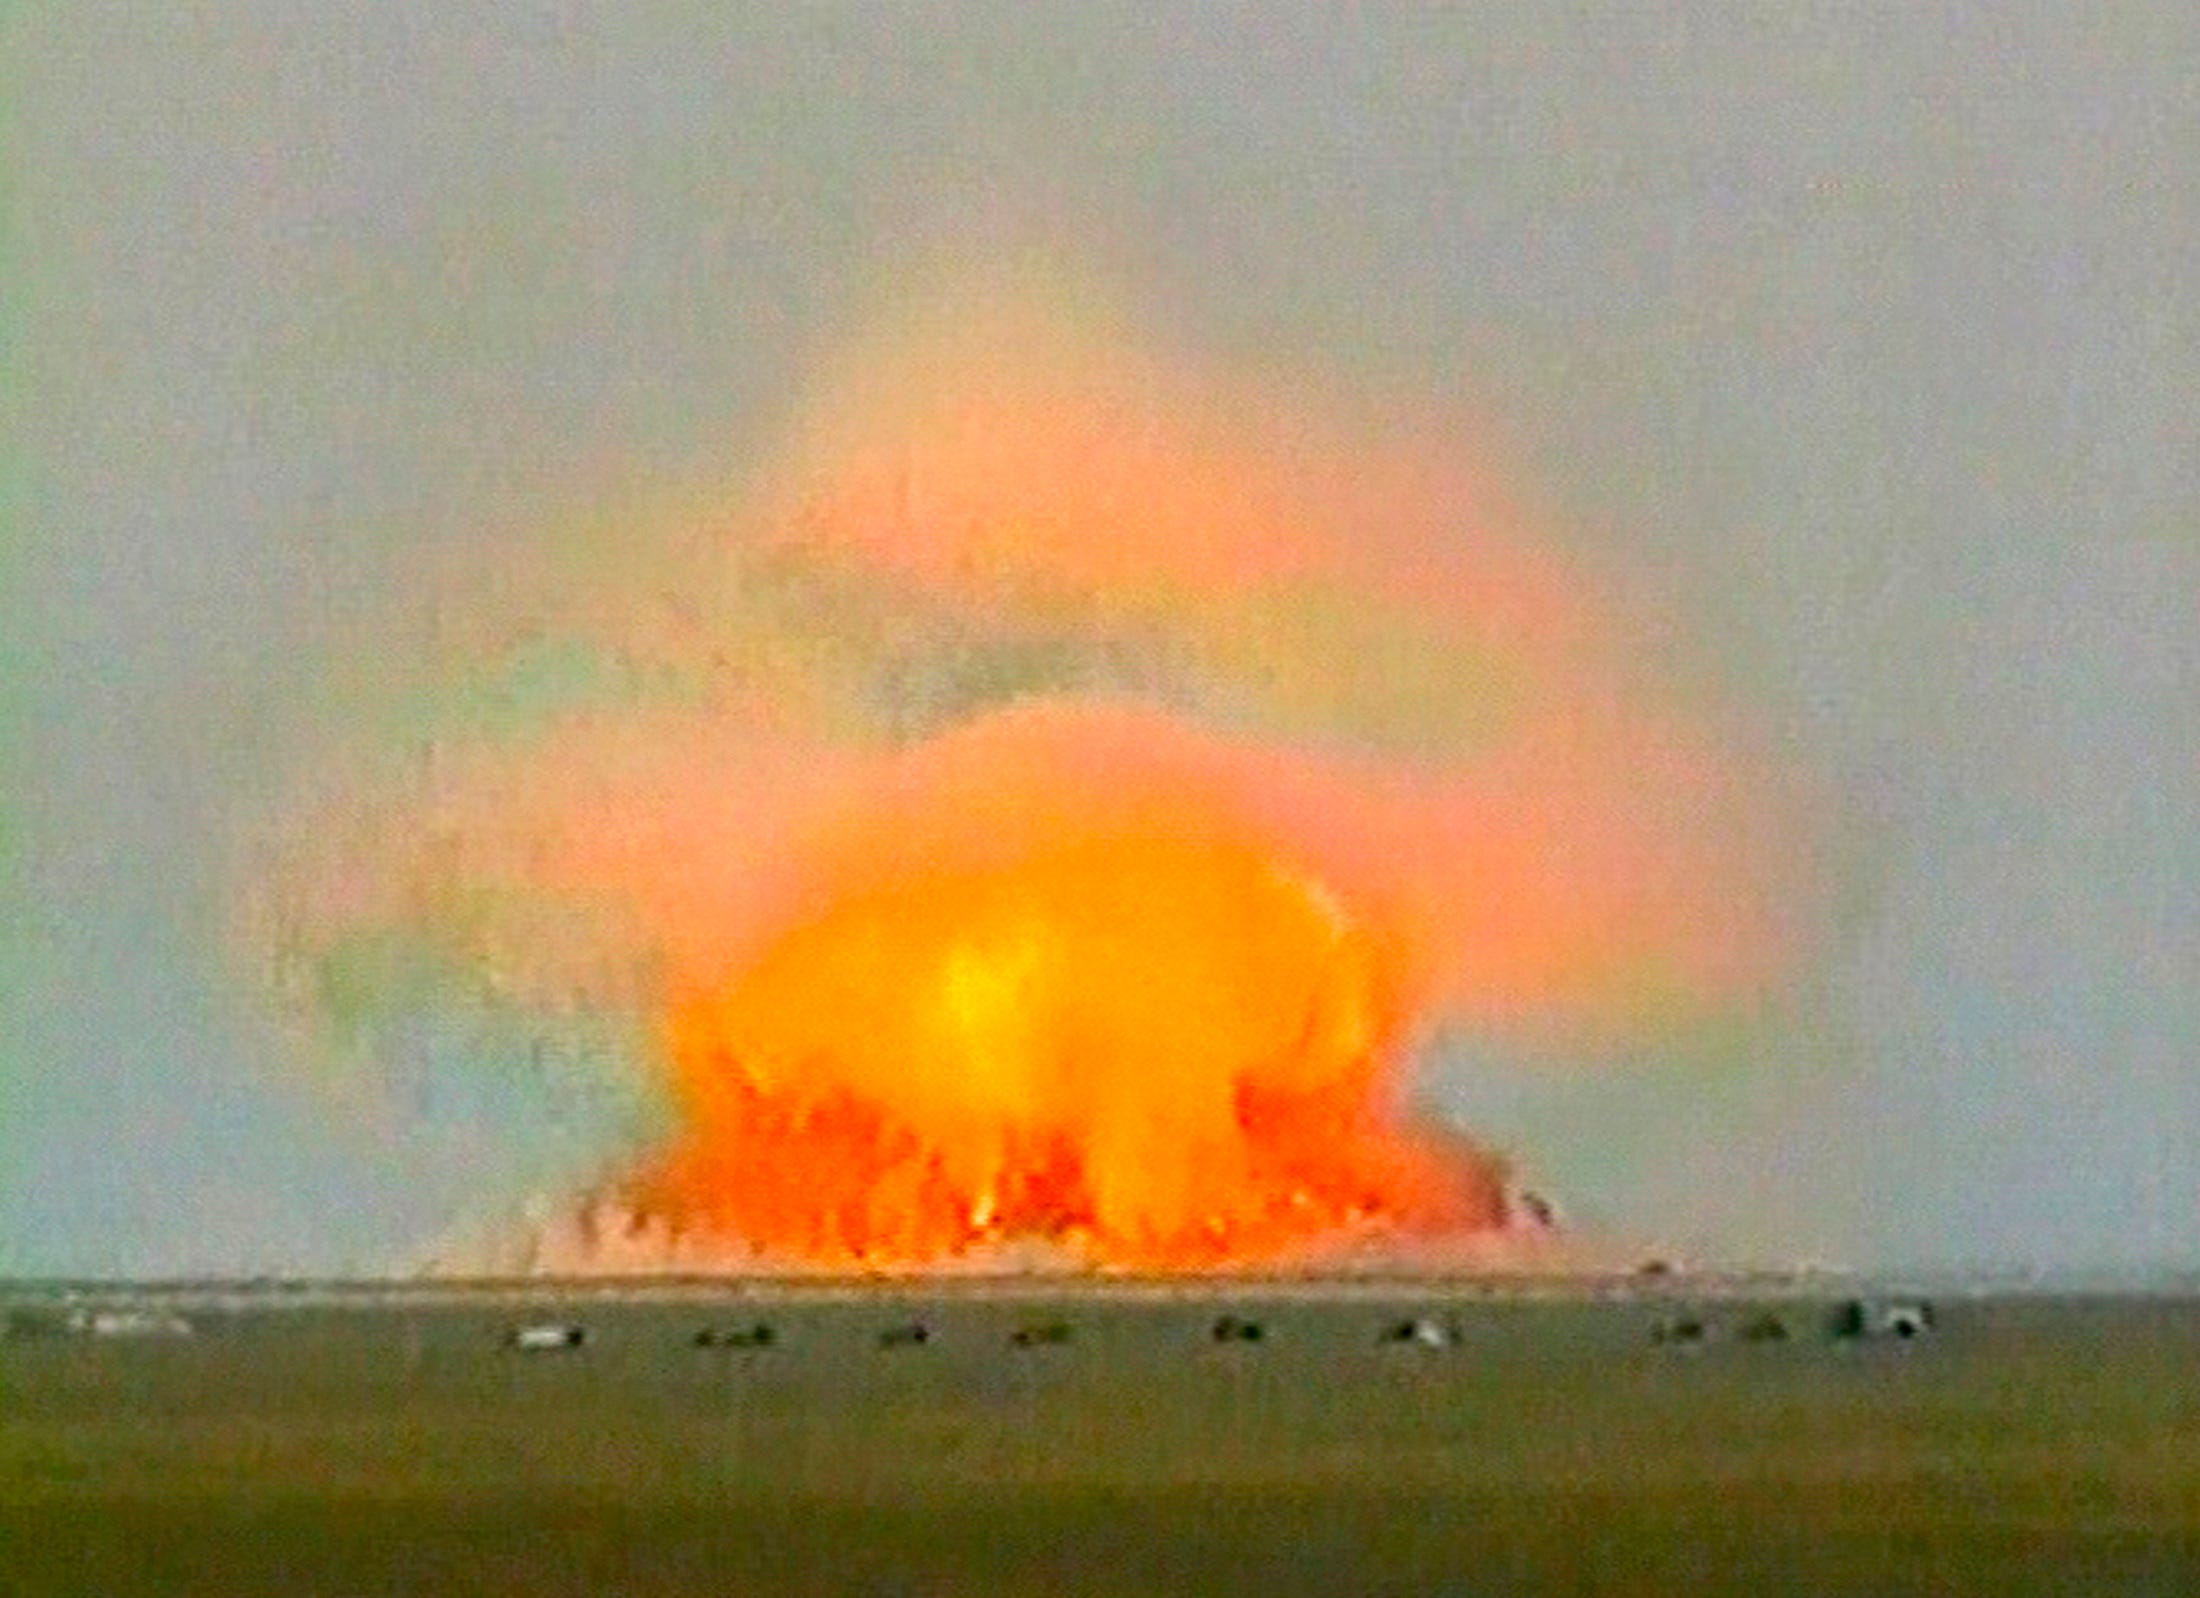 russia says its scientists created a new nuclear blast simulator with flash and mushroom cloud effects to train soldiers